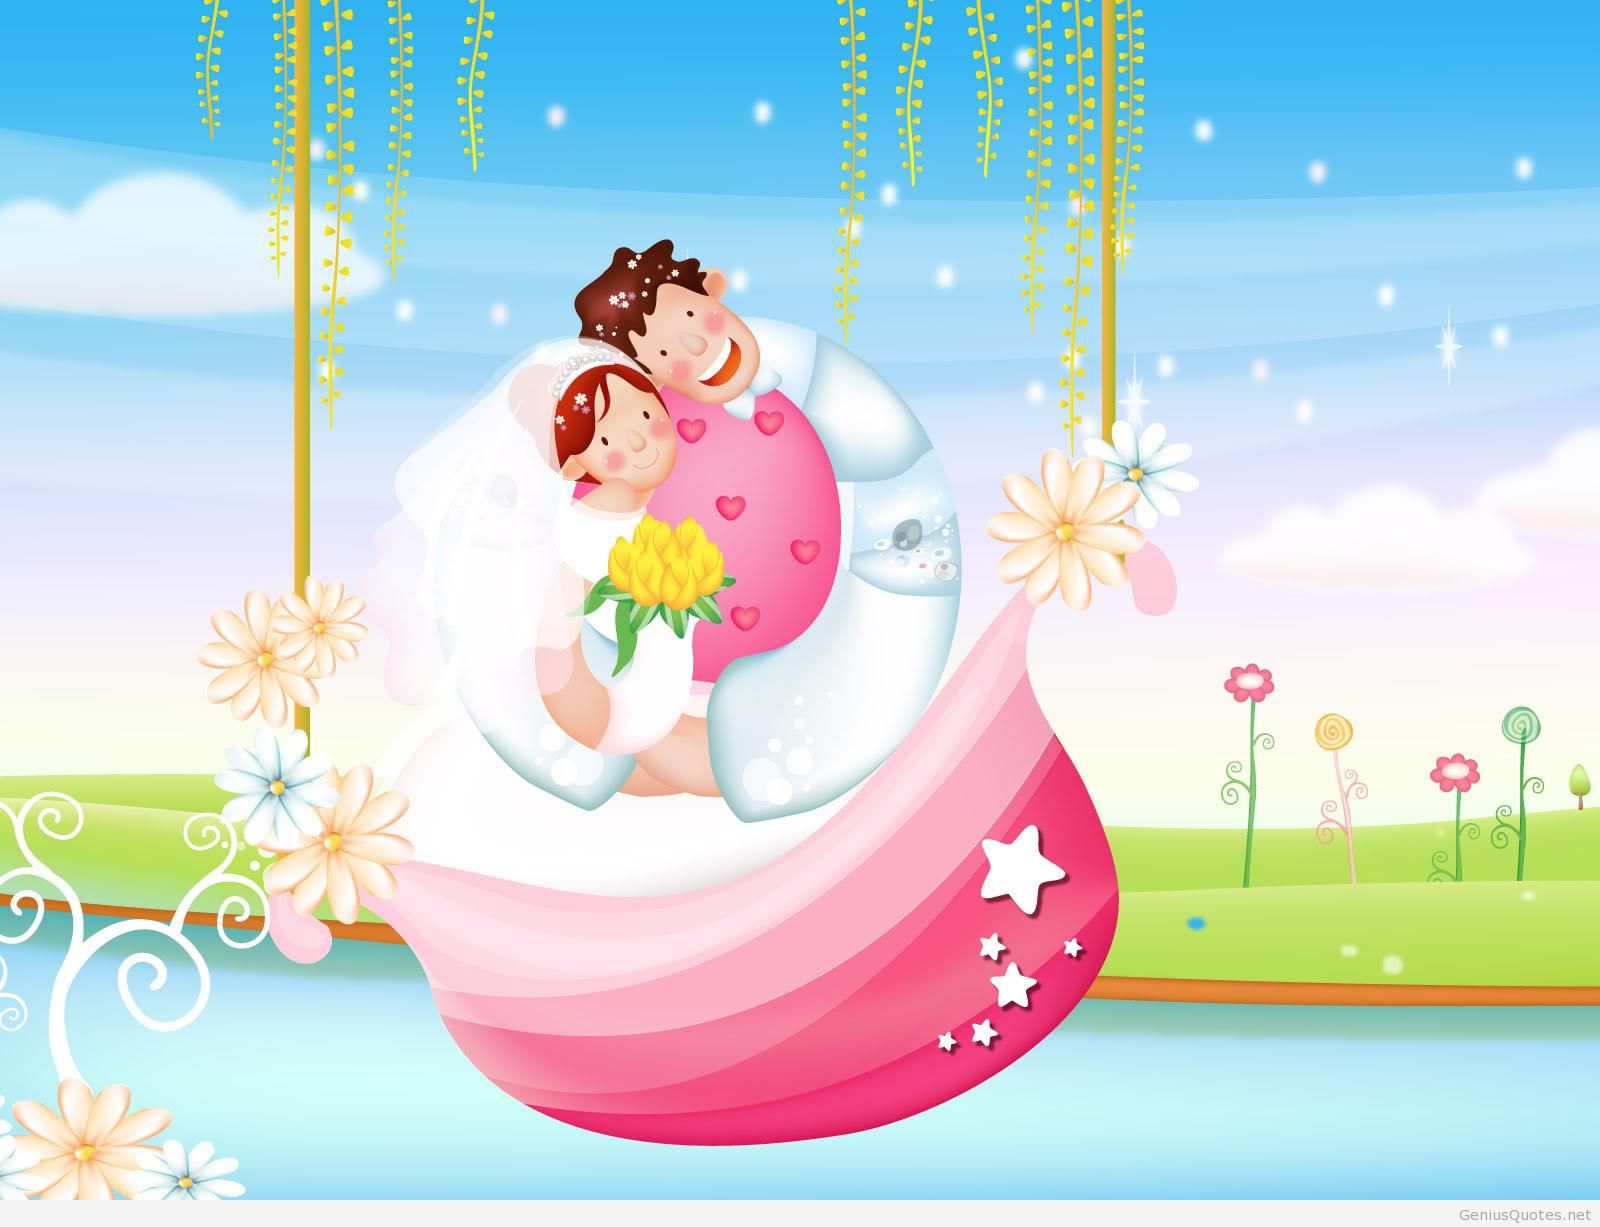 Second Wedding Anniversary Wishes For Friend - HD Wallpaper 